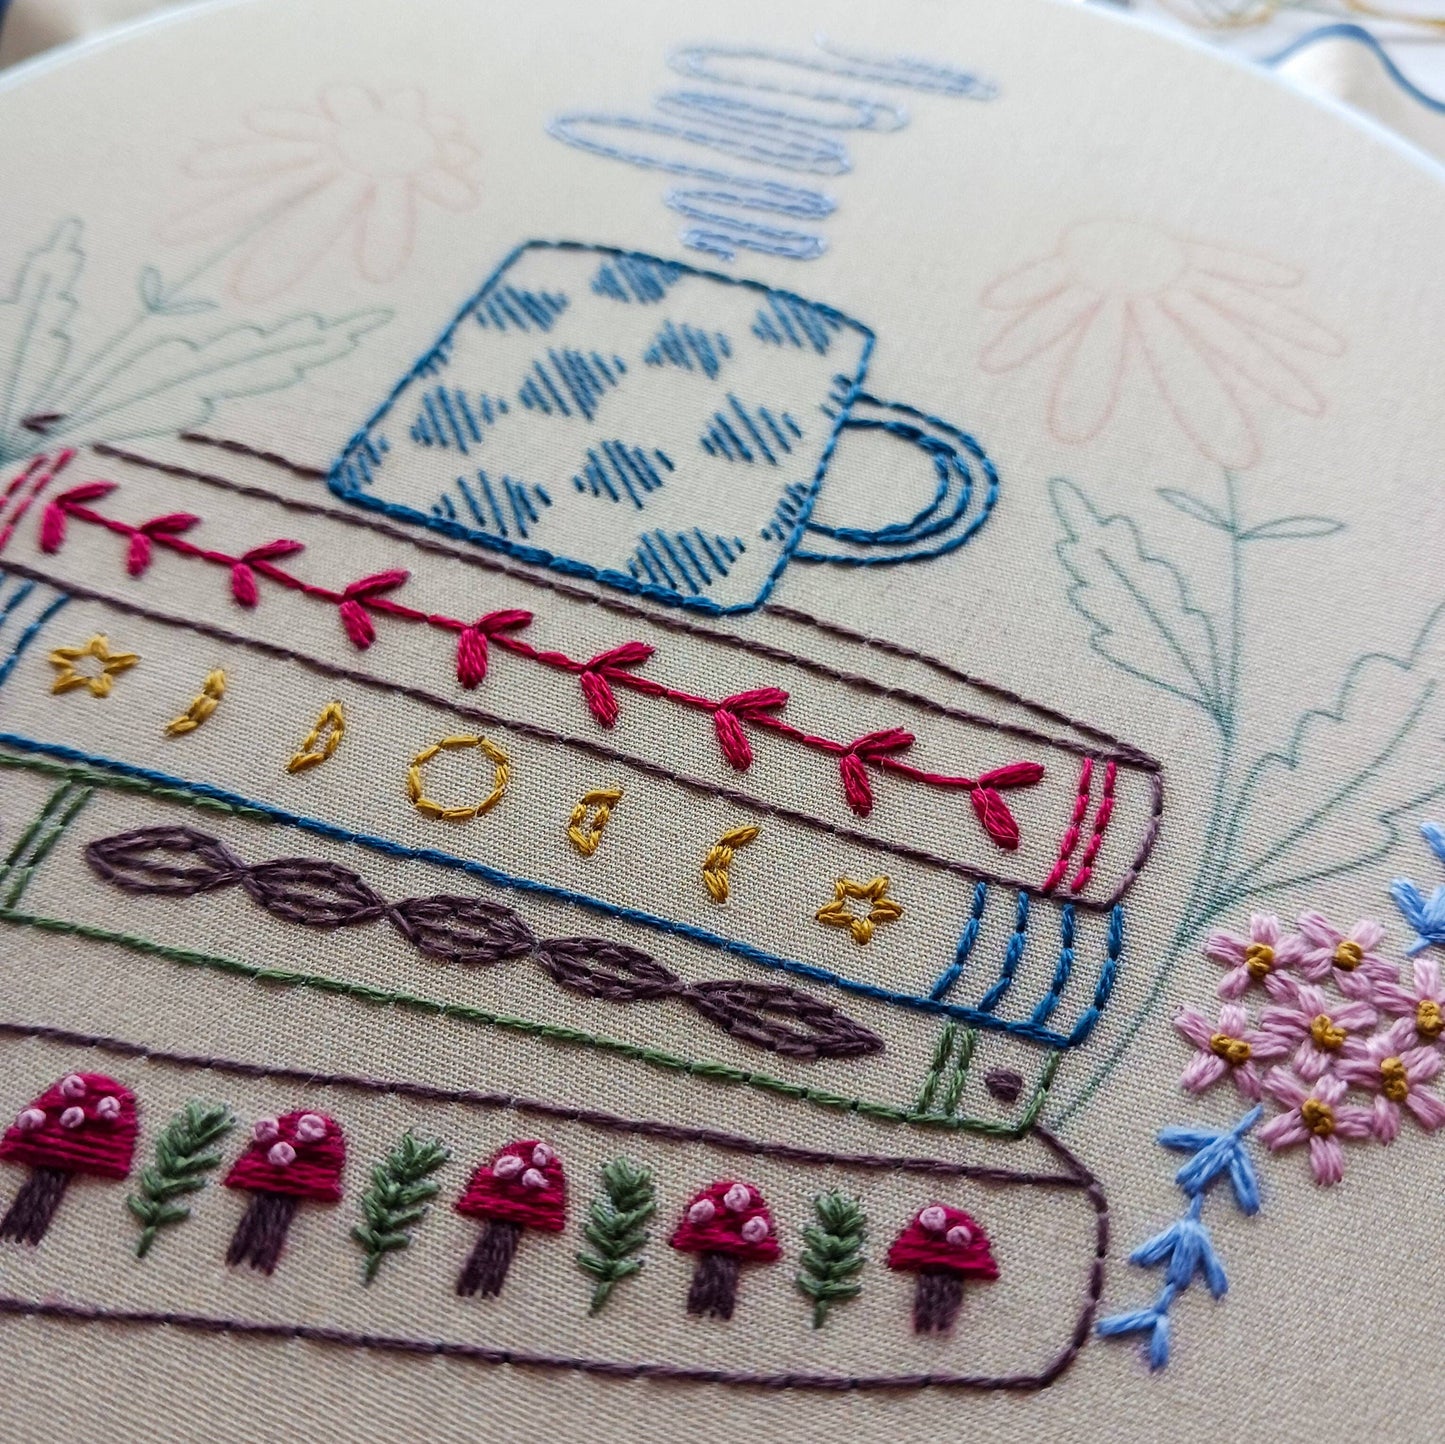 Book Nook - Cozyblue Handmade Embroidery Kit